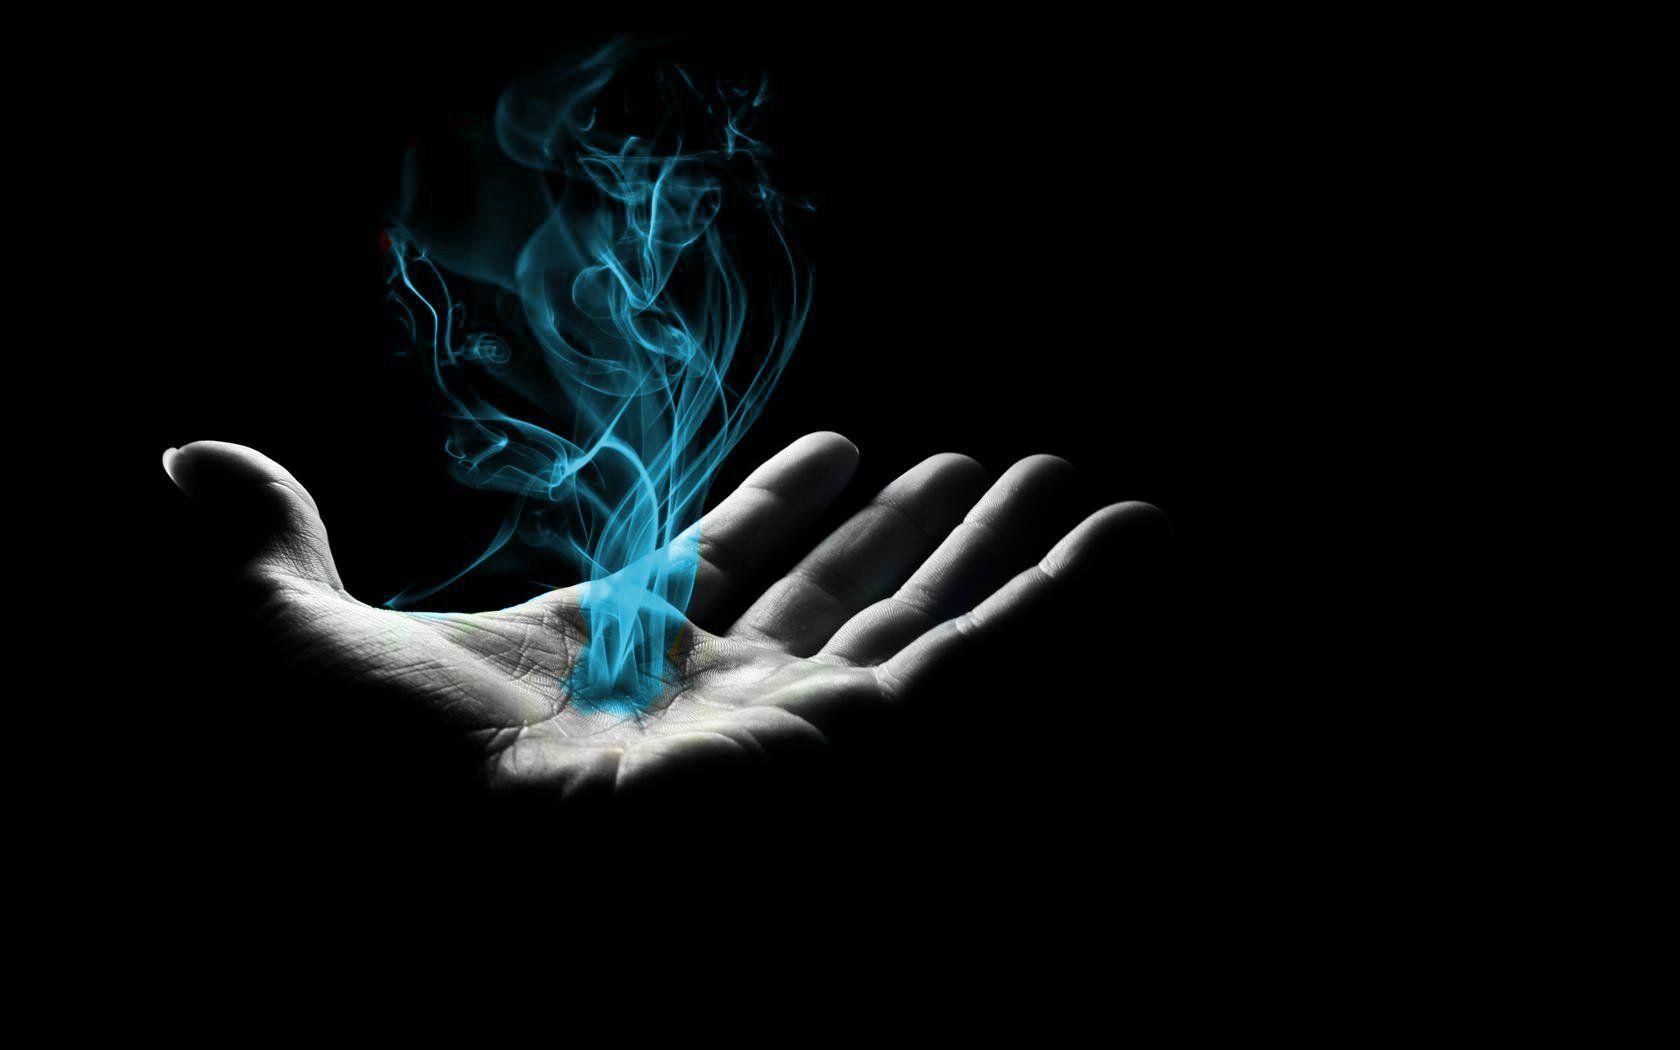 Artistic Hand Wallpaper, High Quality Artistic Hand Background